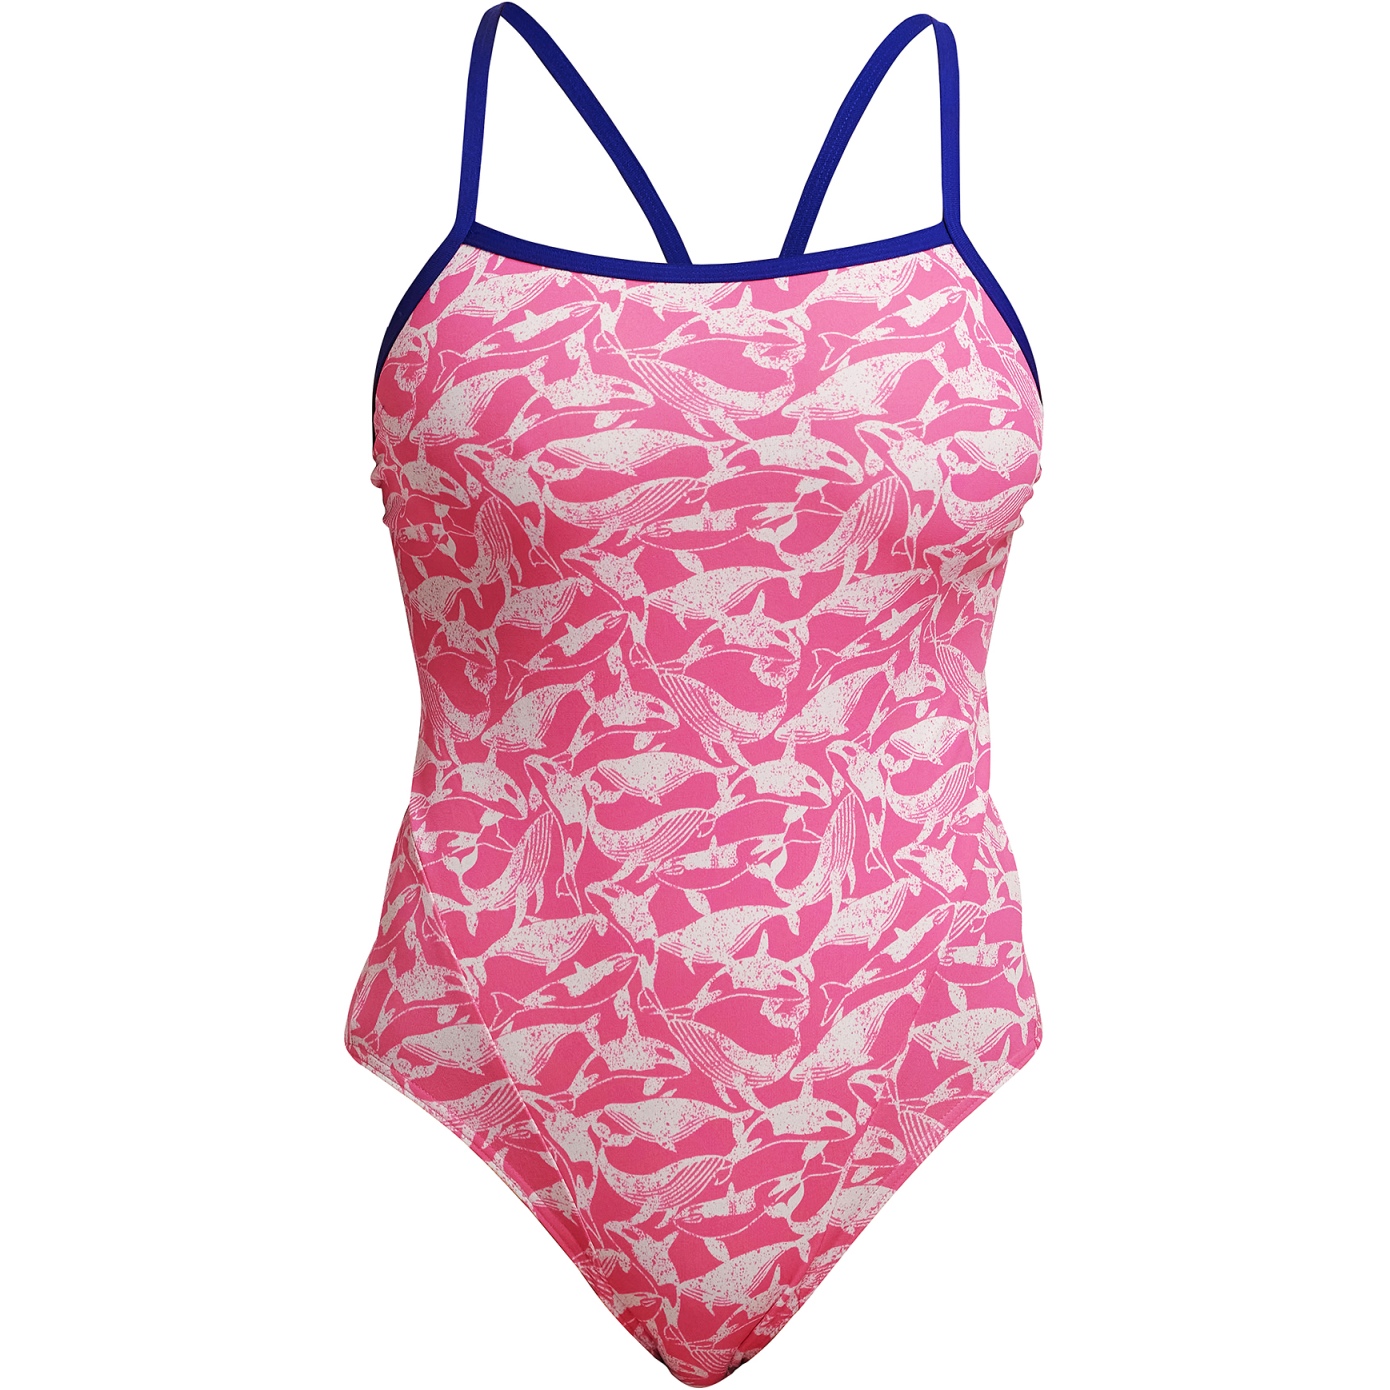 Picture of Funkita Single Strap One Piece Swimsuit Women - Beached Bae